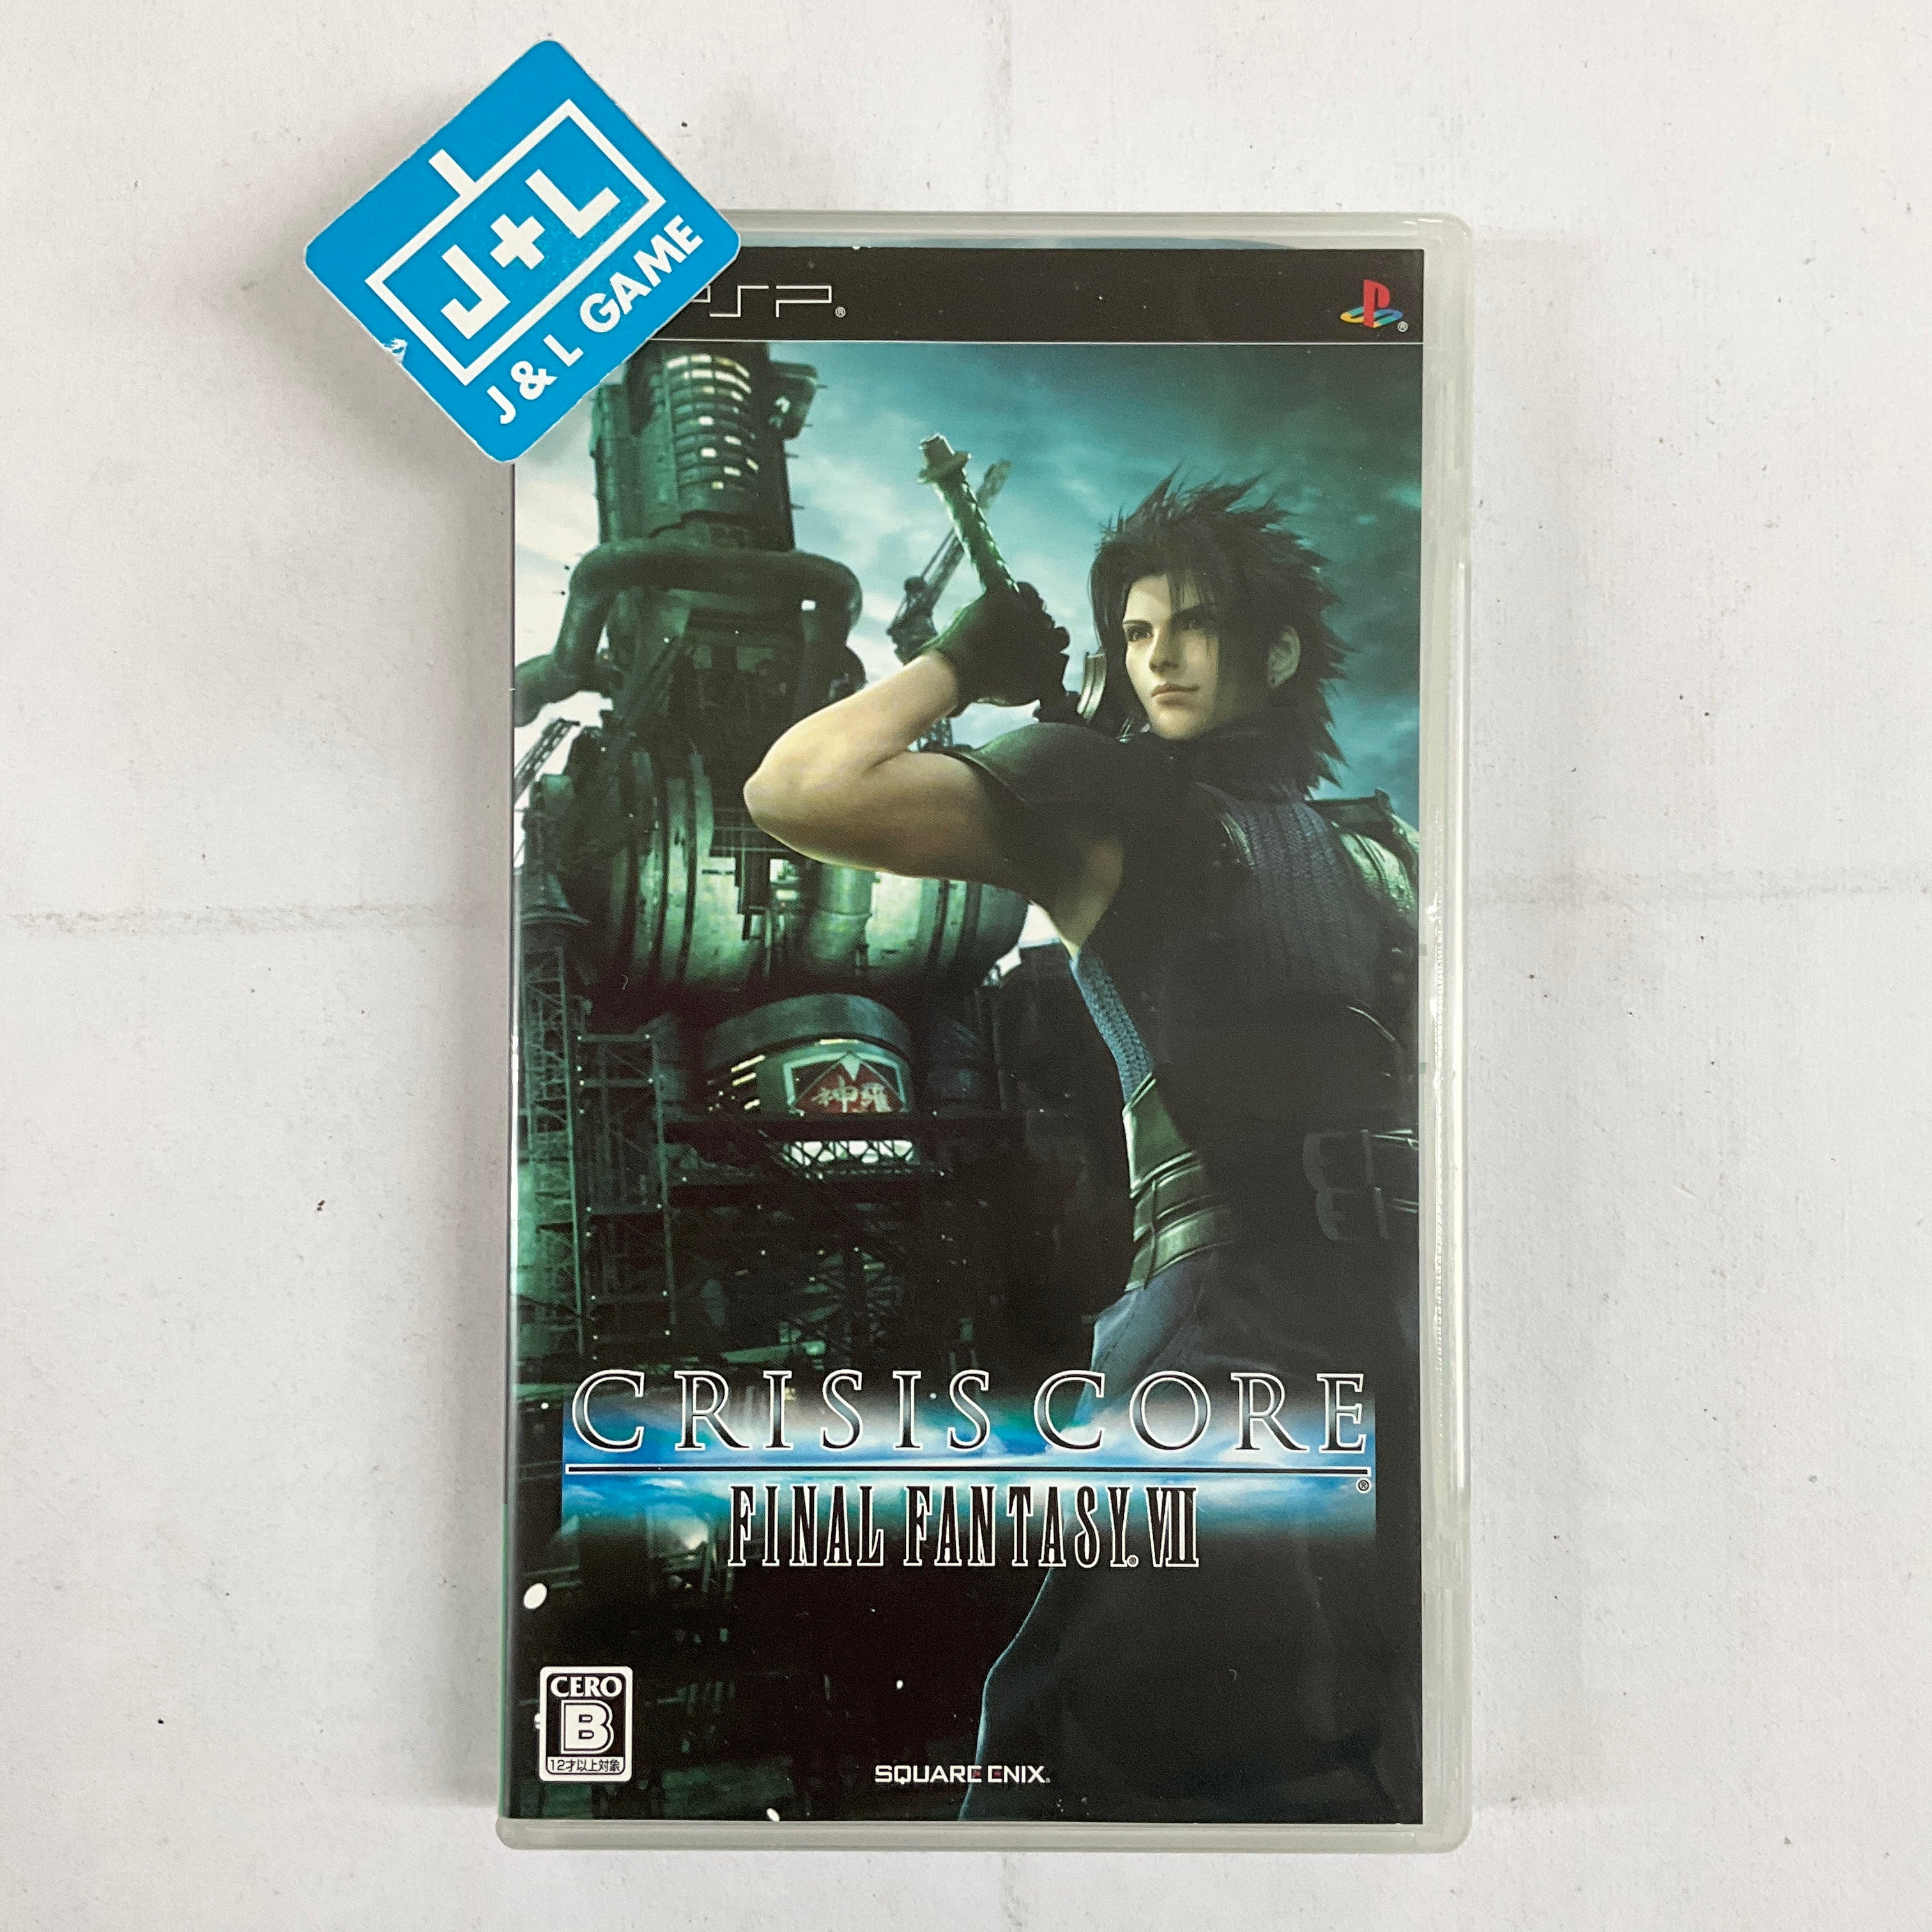 Crisis Core Final Fantasy VII - (FFVII 10th Anniversary Limited) PSP 2000  Bundle - (PSP) Sony PSP [Pre-Owned] (Japanese Import)